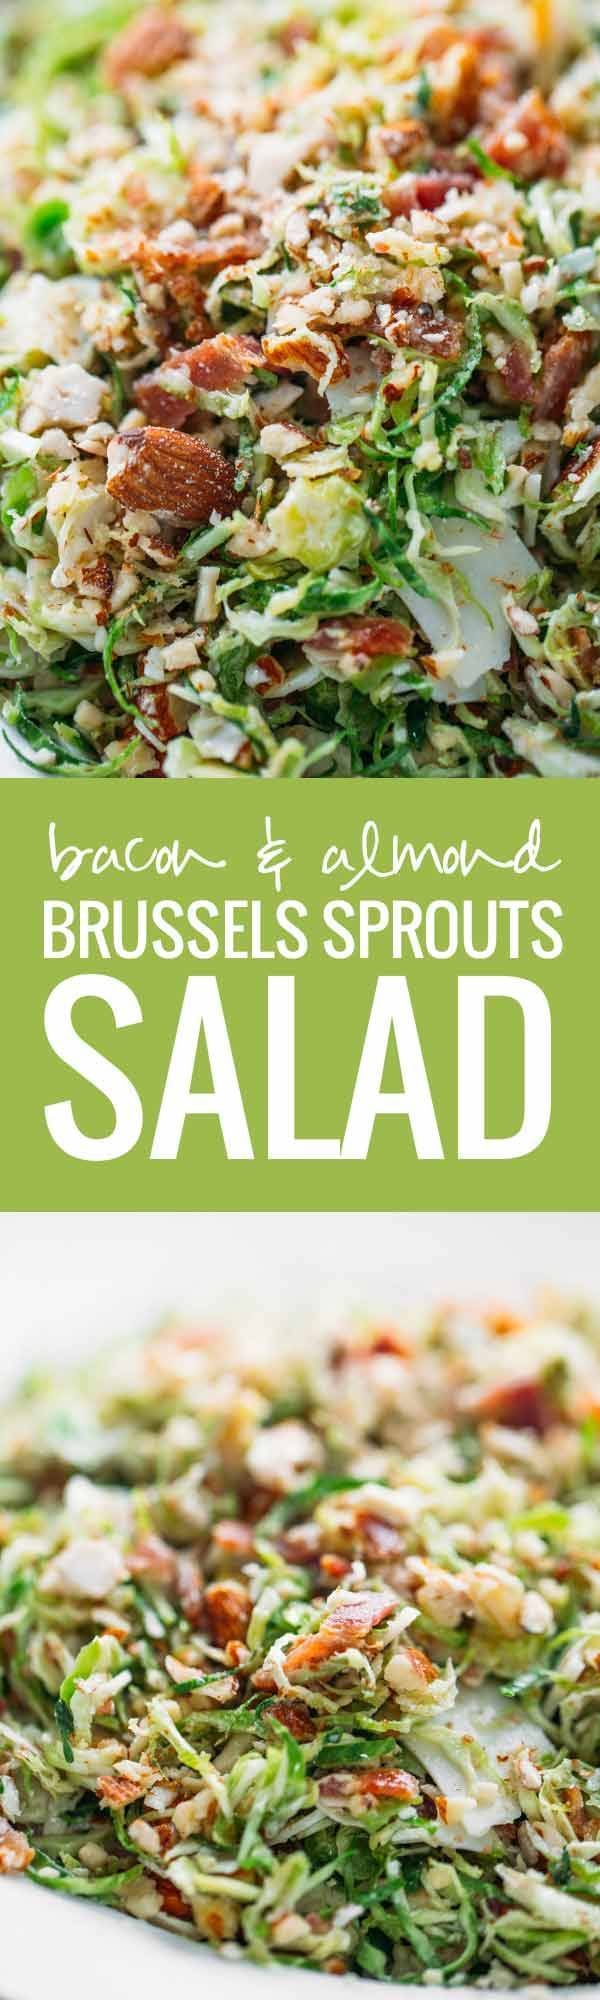 Bacon and Brussels Sprout Salad - bacon, almonds, Parmesan, light citrus vinaigrette, and paper-thin brussels sprouts!